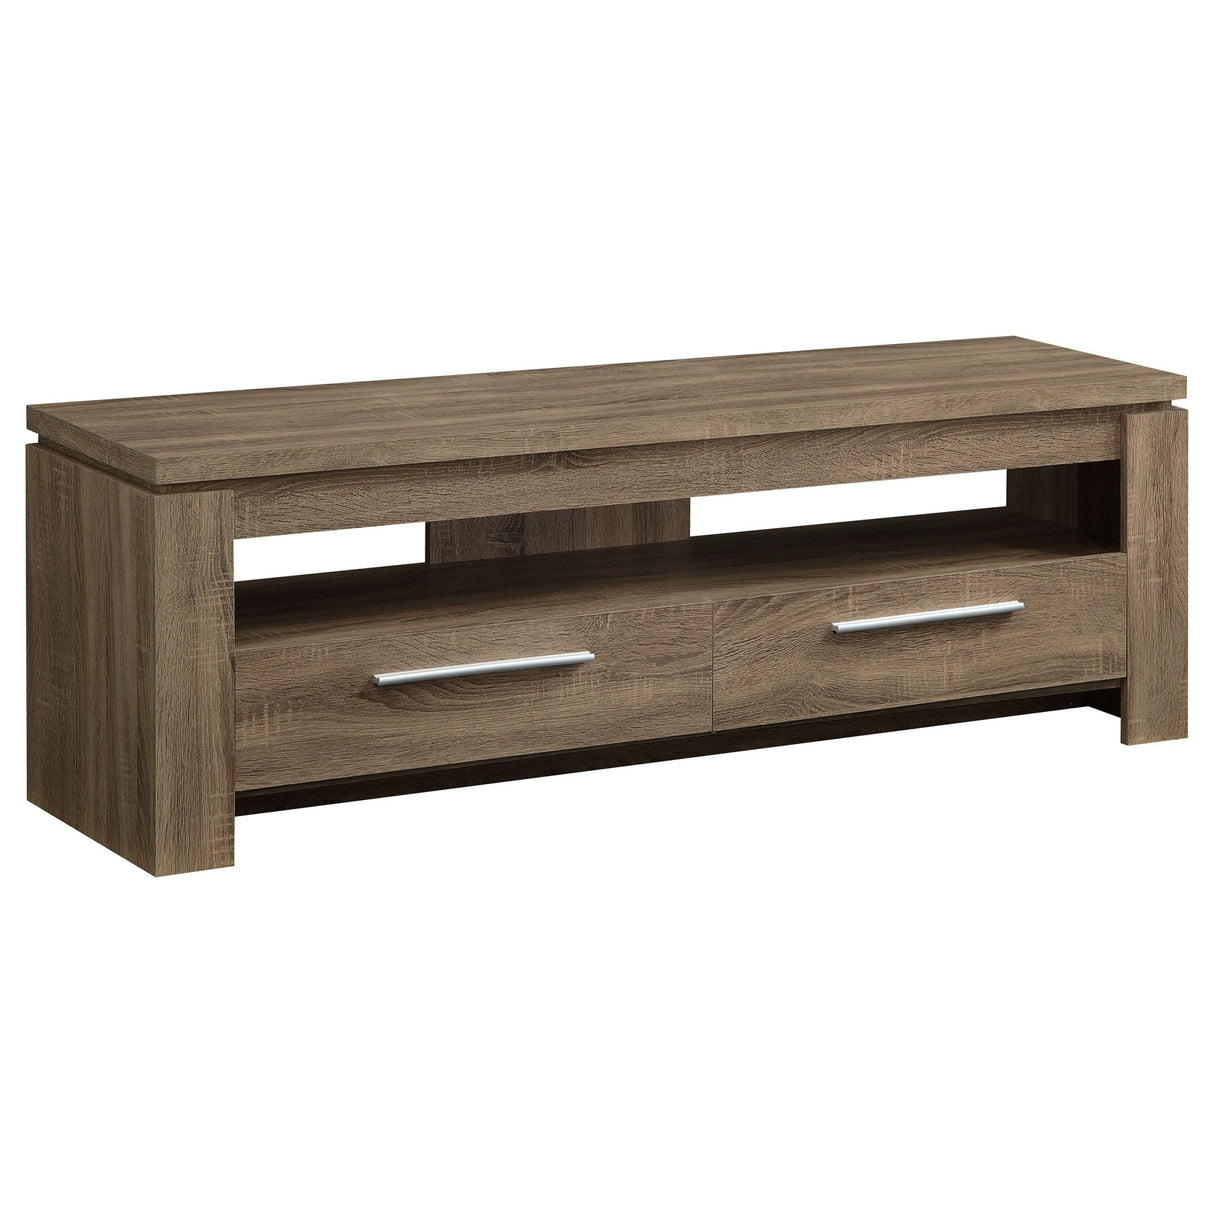 59" Tv Stand - Elkton 2-drawer TV Console Weathered Brown